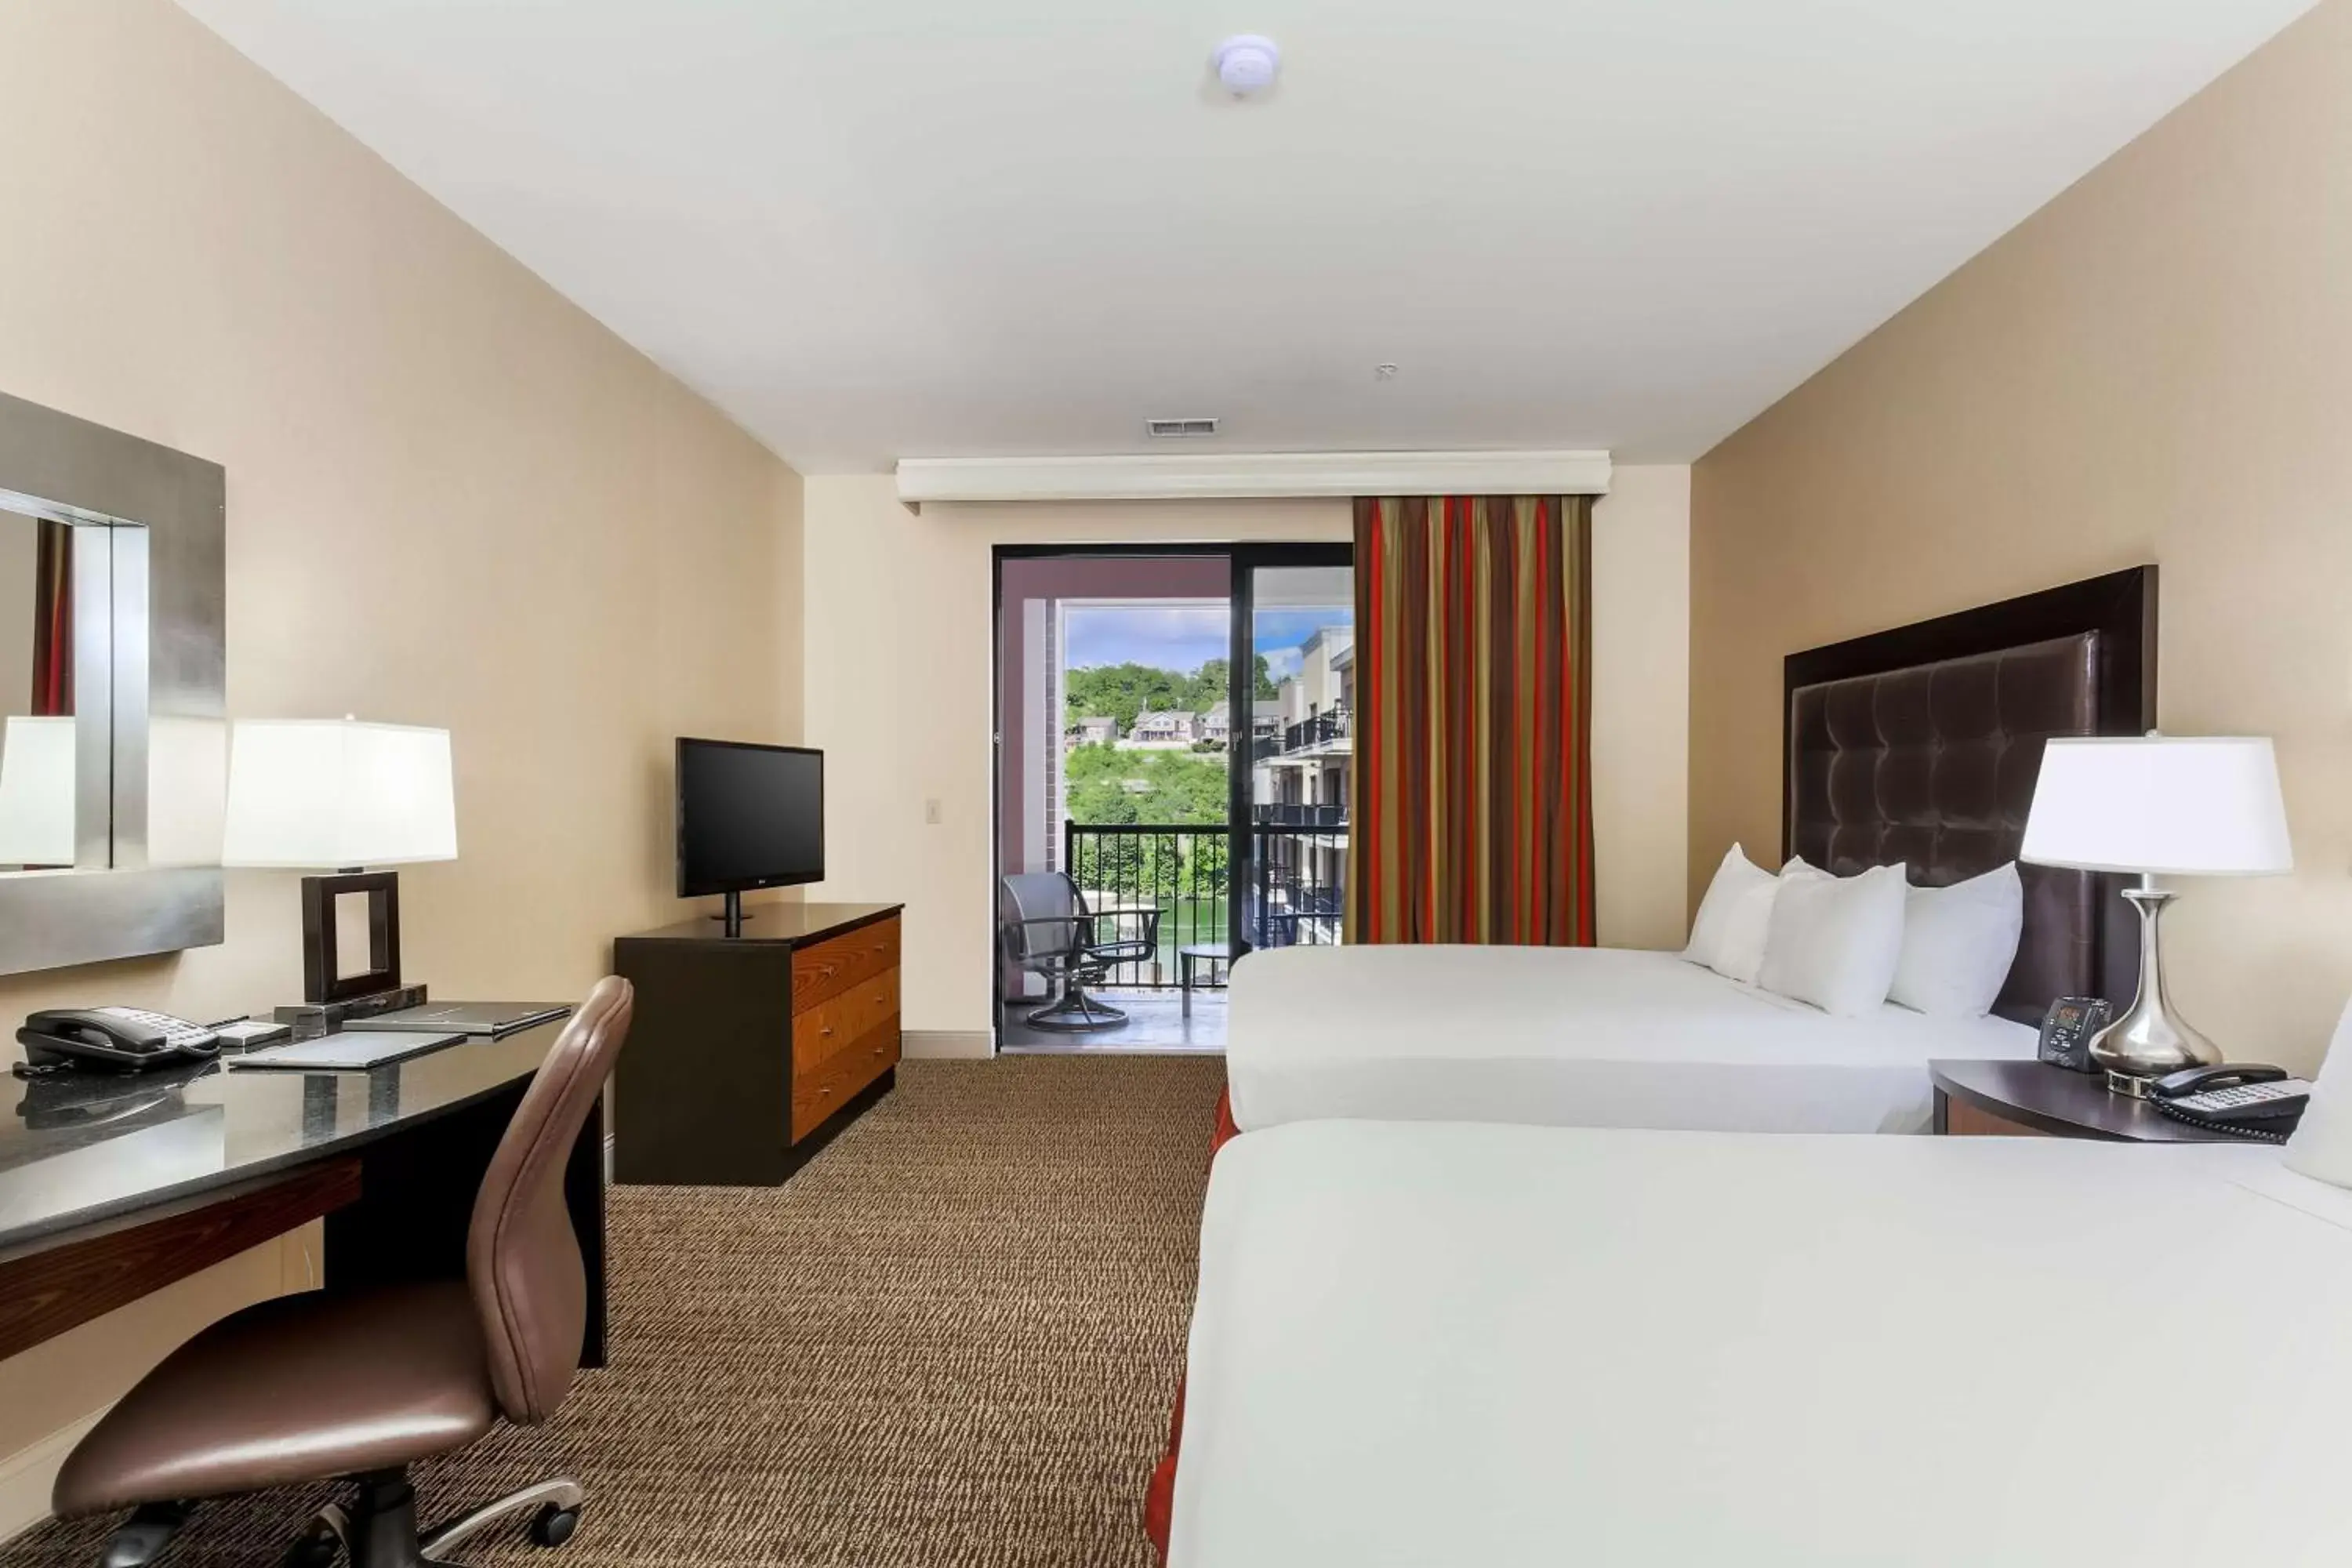 Deluxe Queen Room with Two Queen Beds and Fountain View in Hilton Promenade Branson Landing